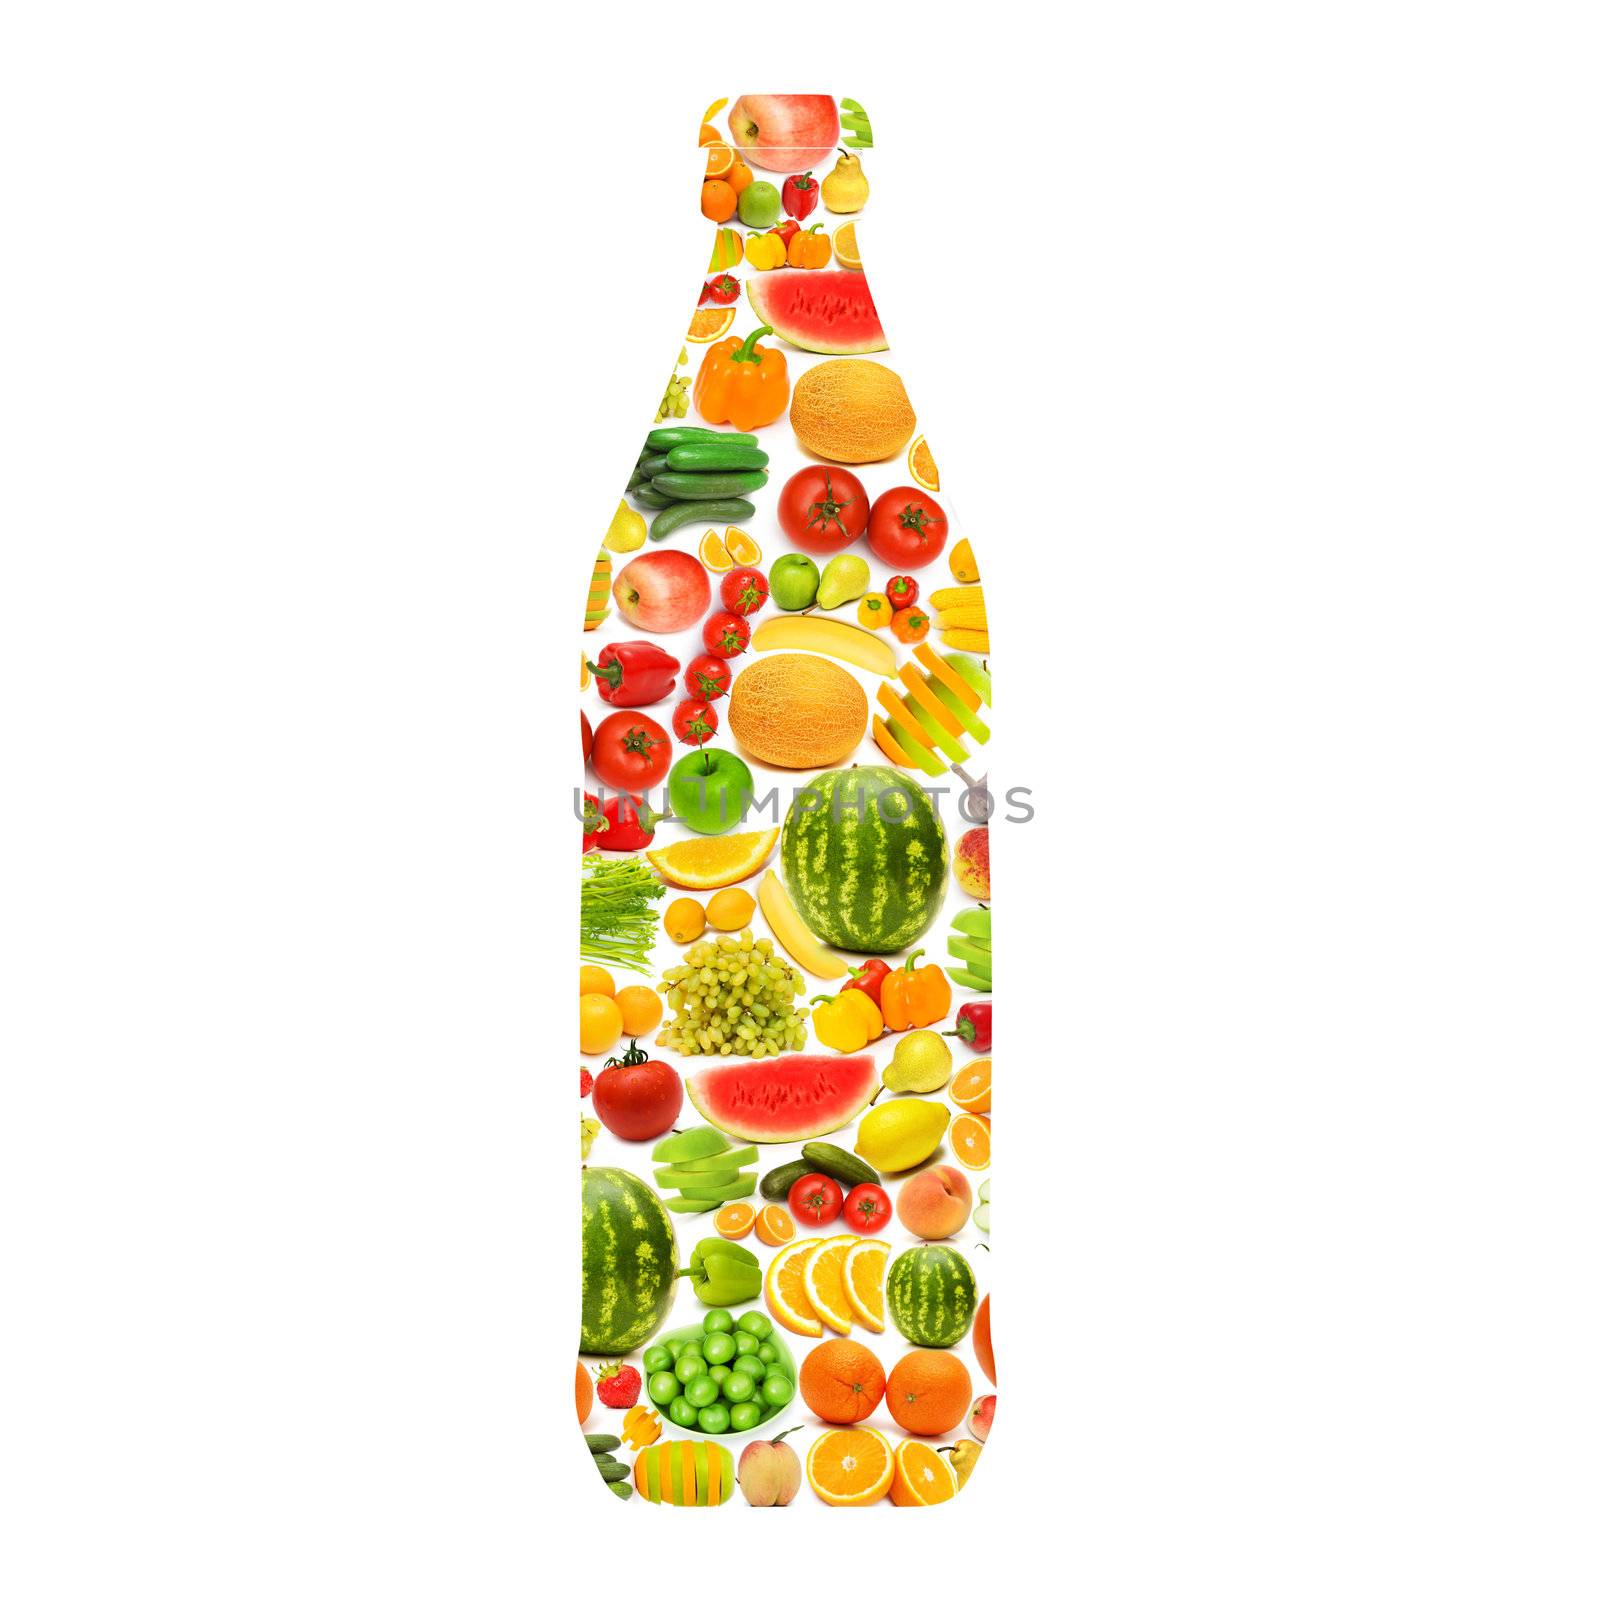 Silhoette made from various fruits and vegetables by Elnur